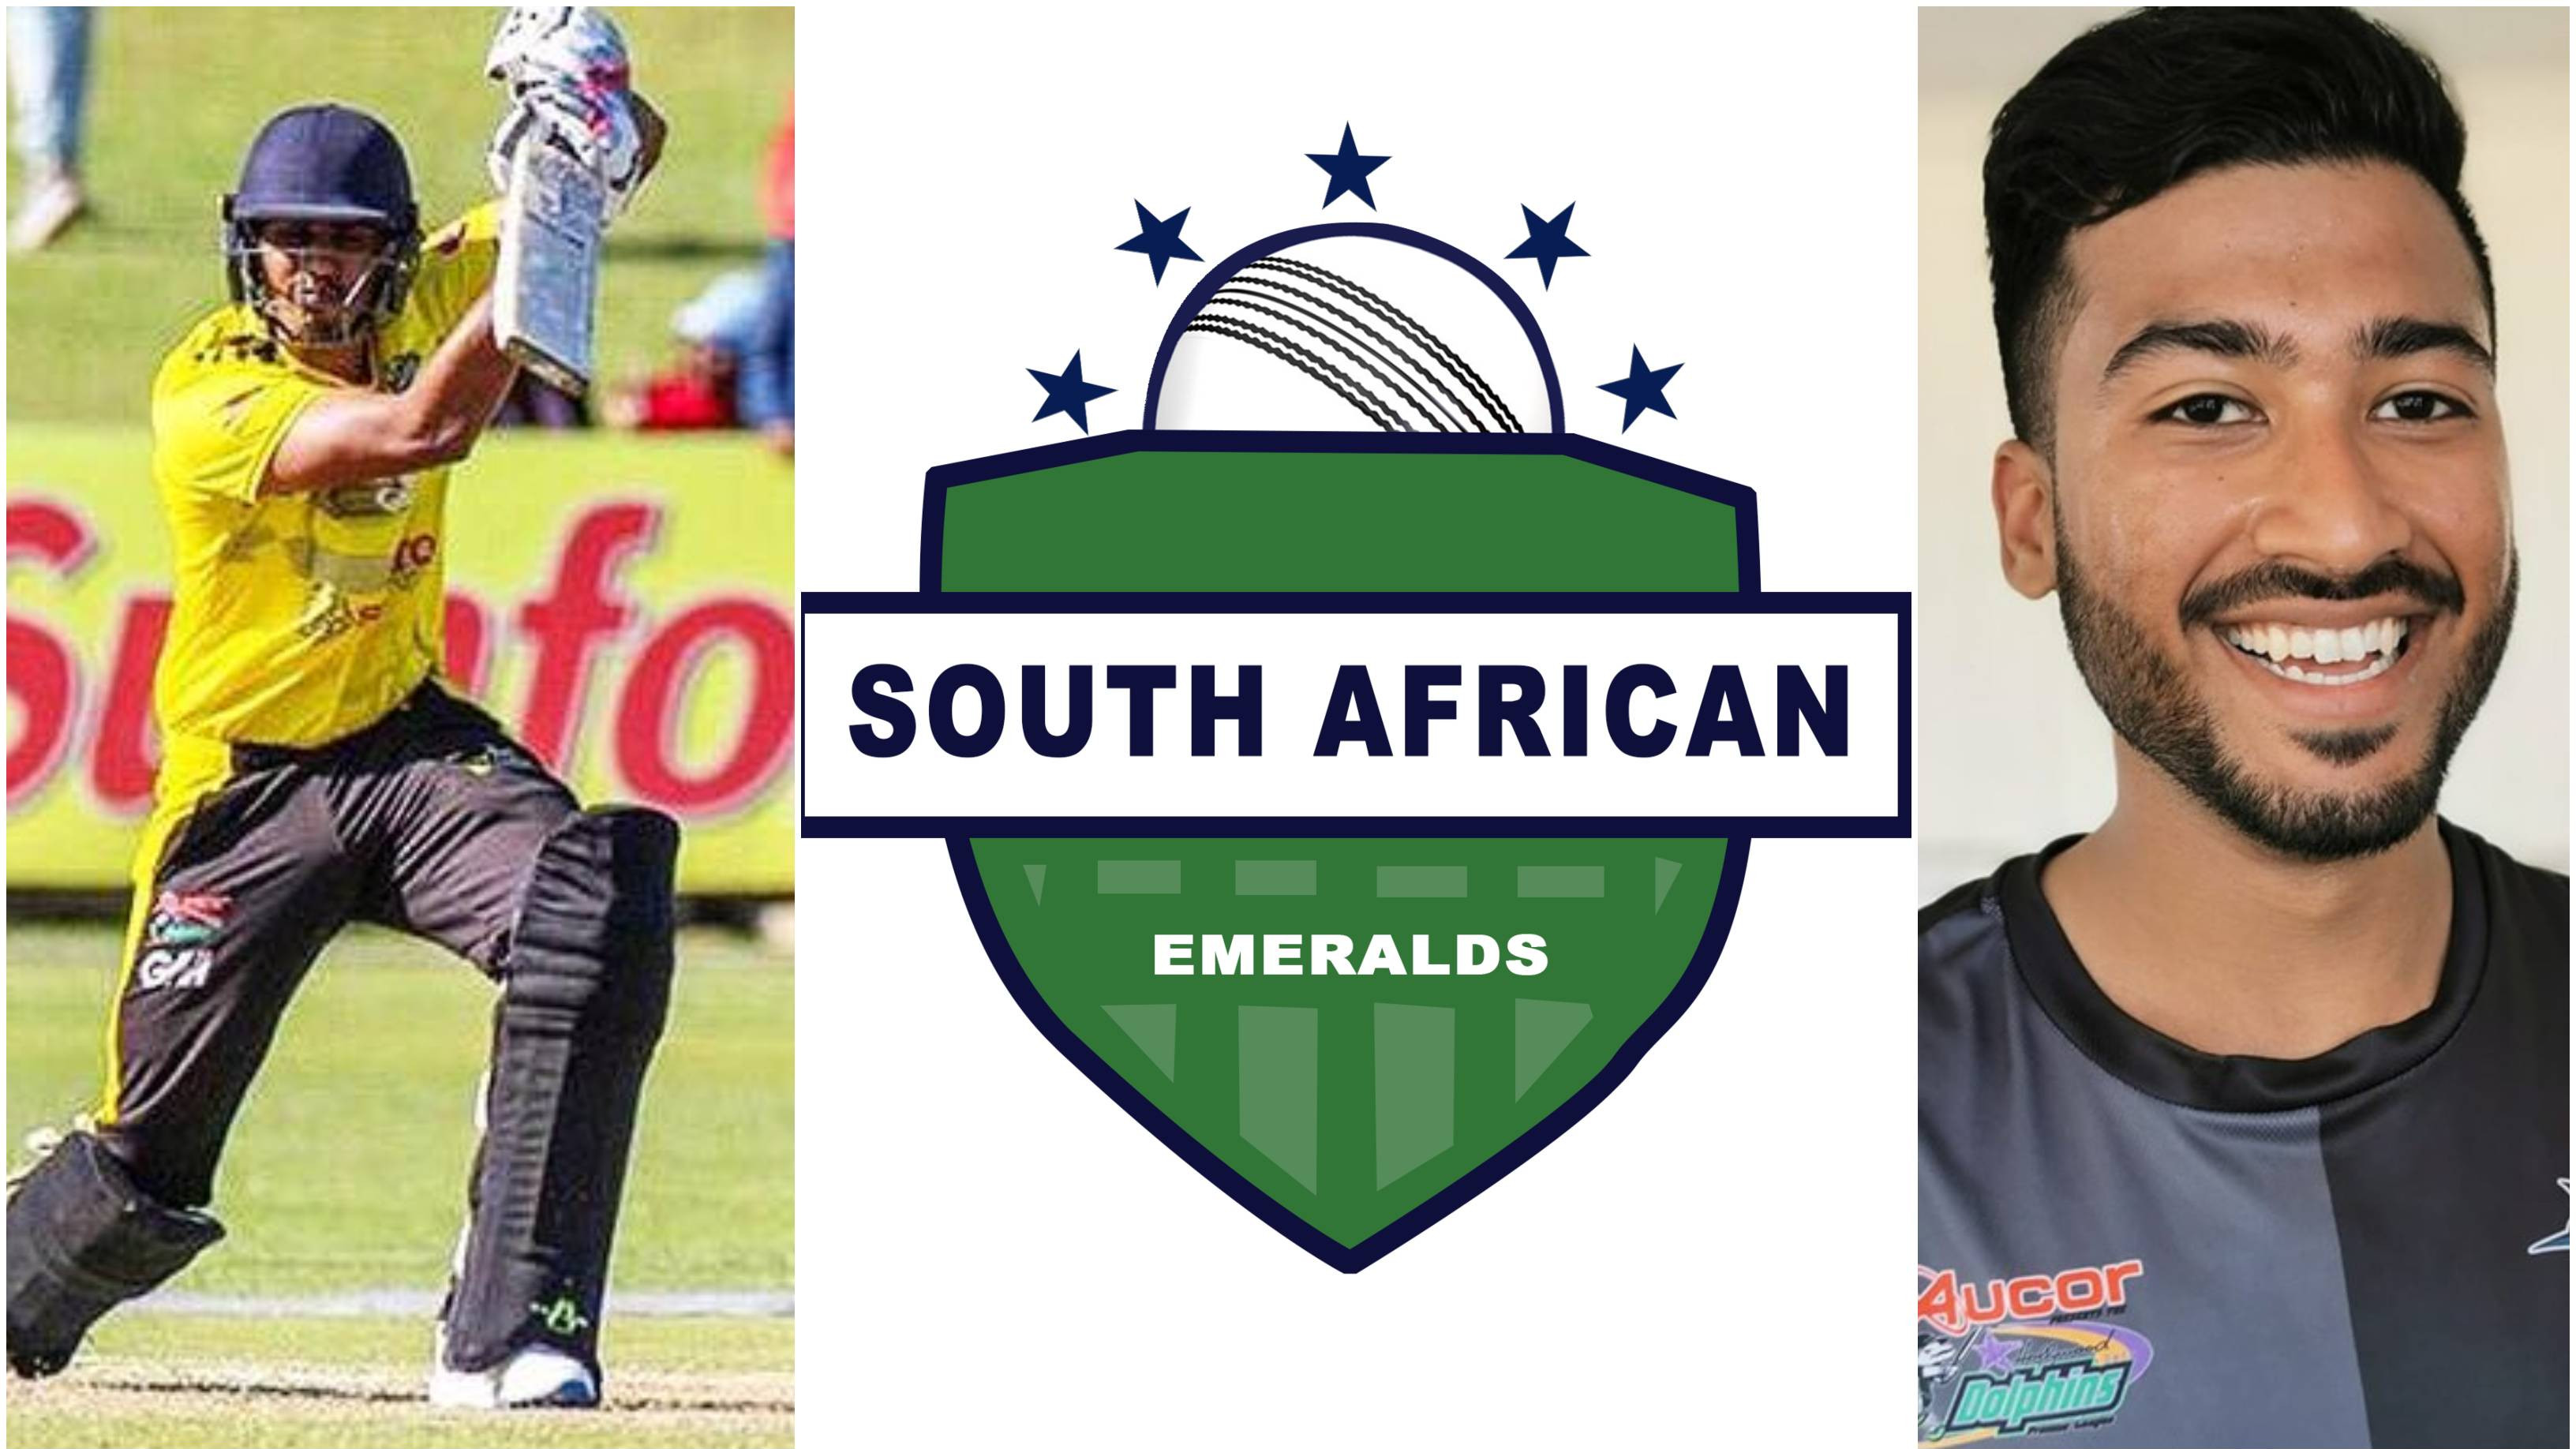 Three Indian origin players feature in South African Emeralds squad for the inaugural GPCL season